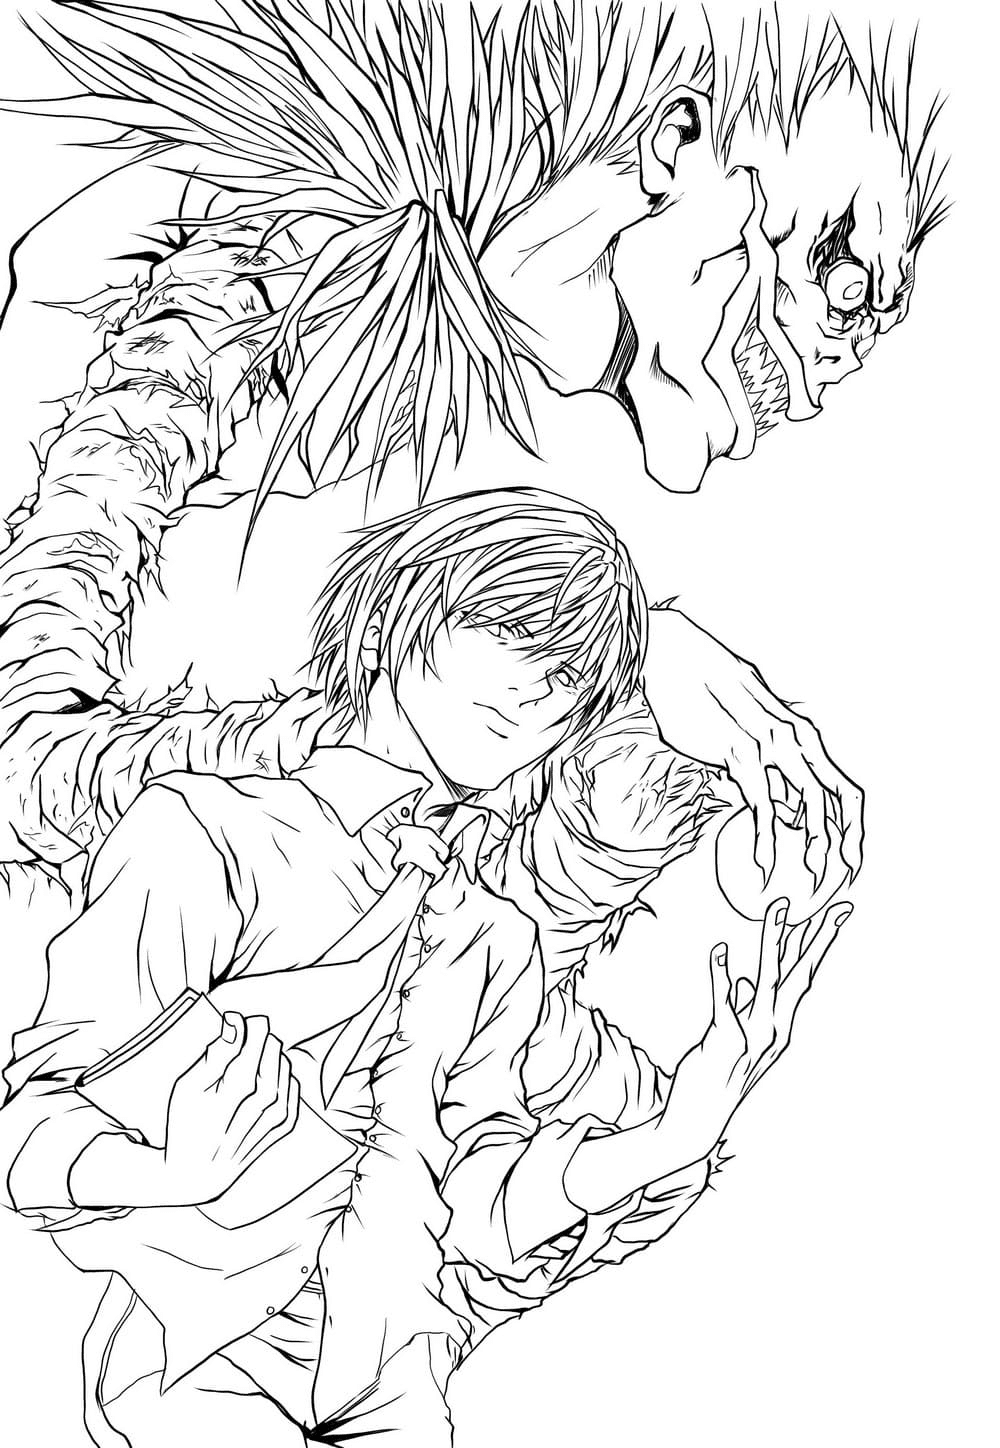 Yagami gives an apple to Ryuk Coloring Pages